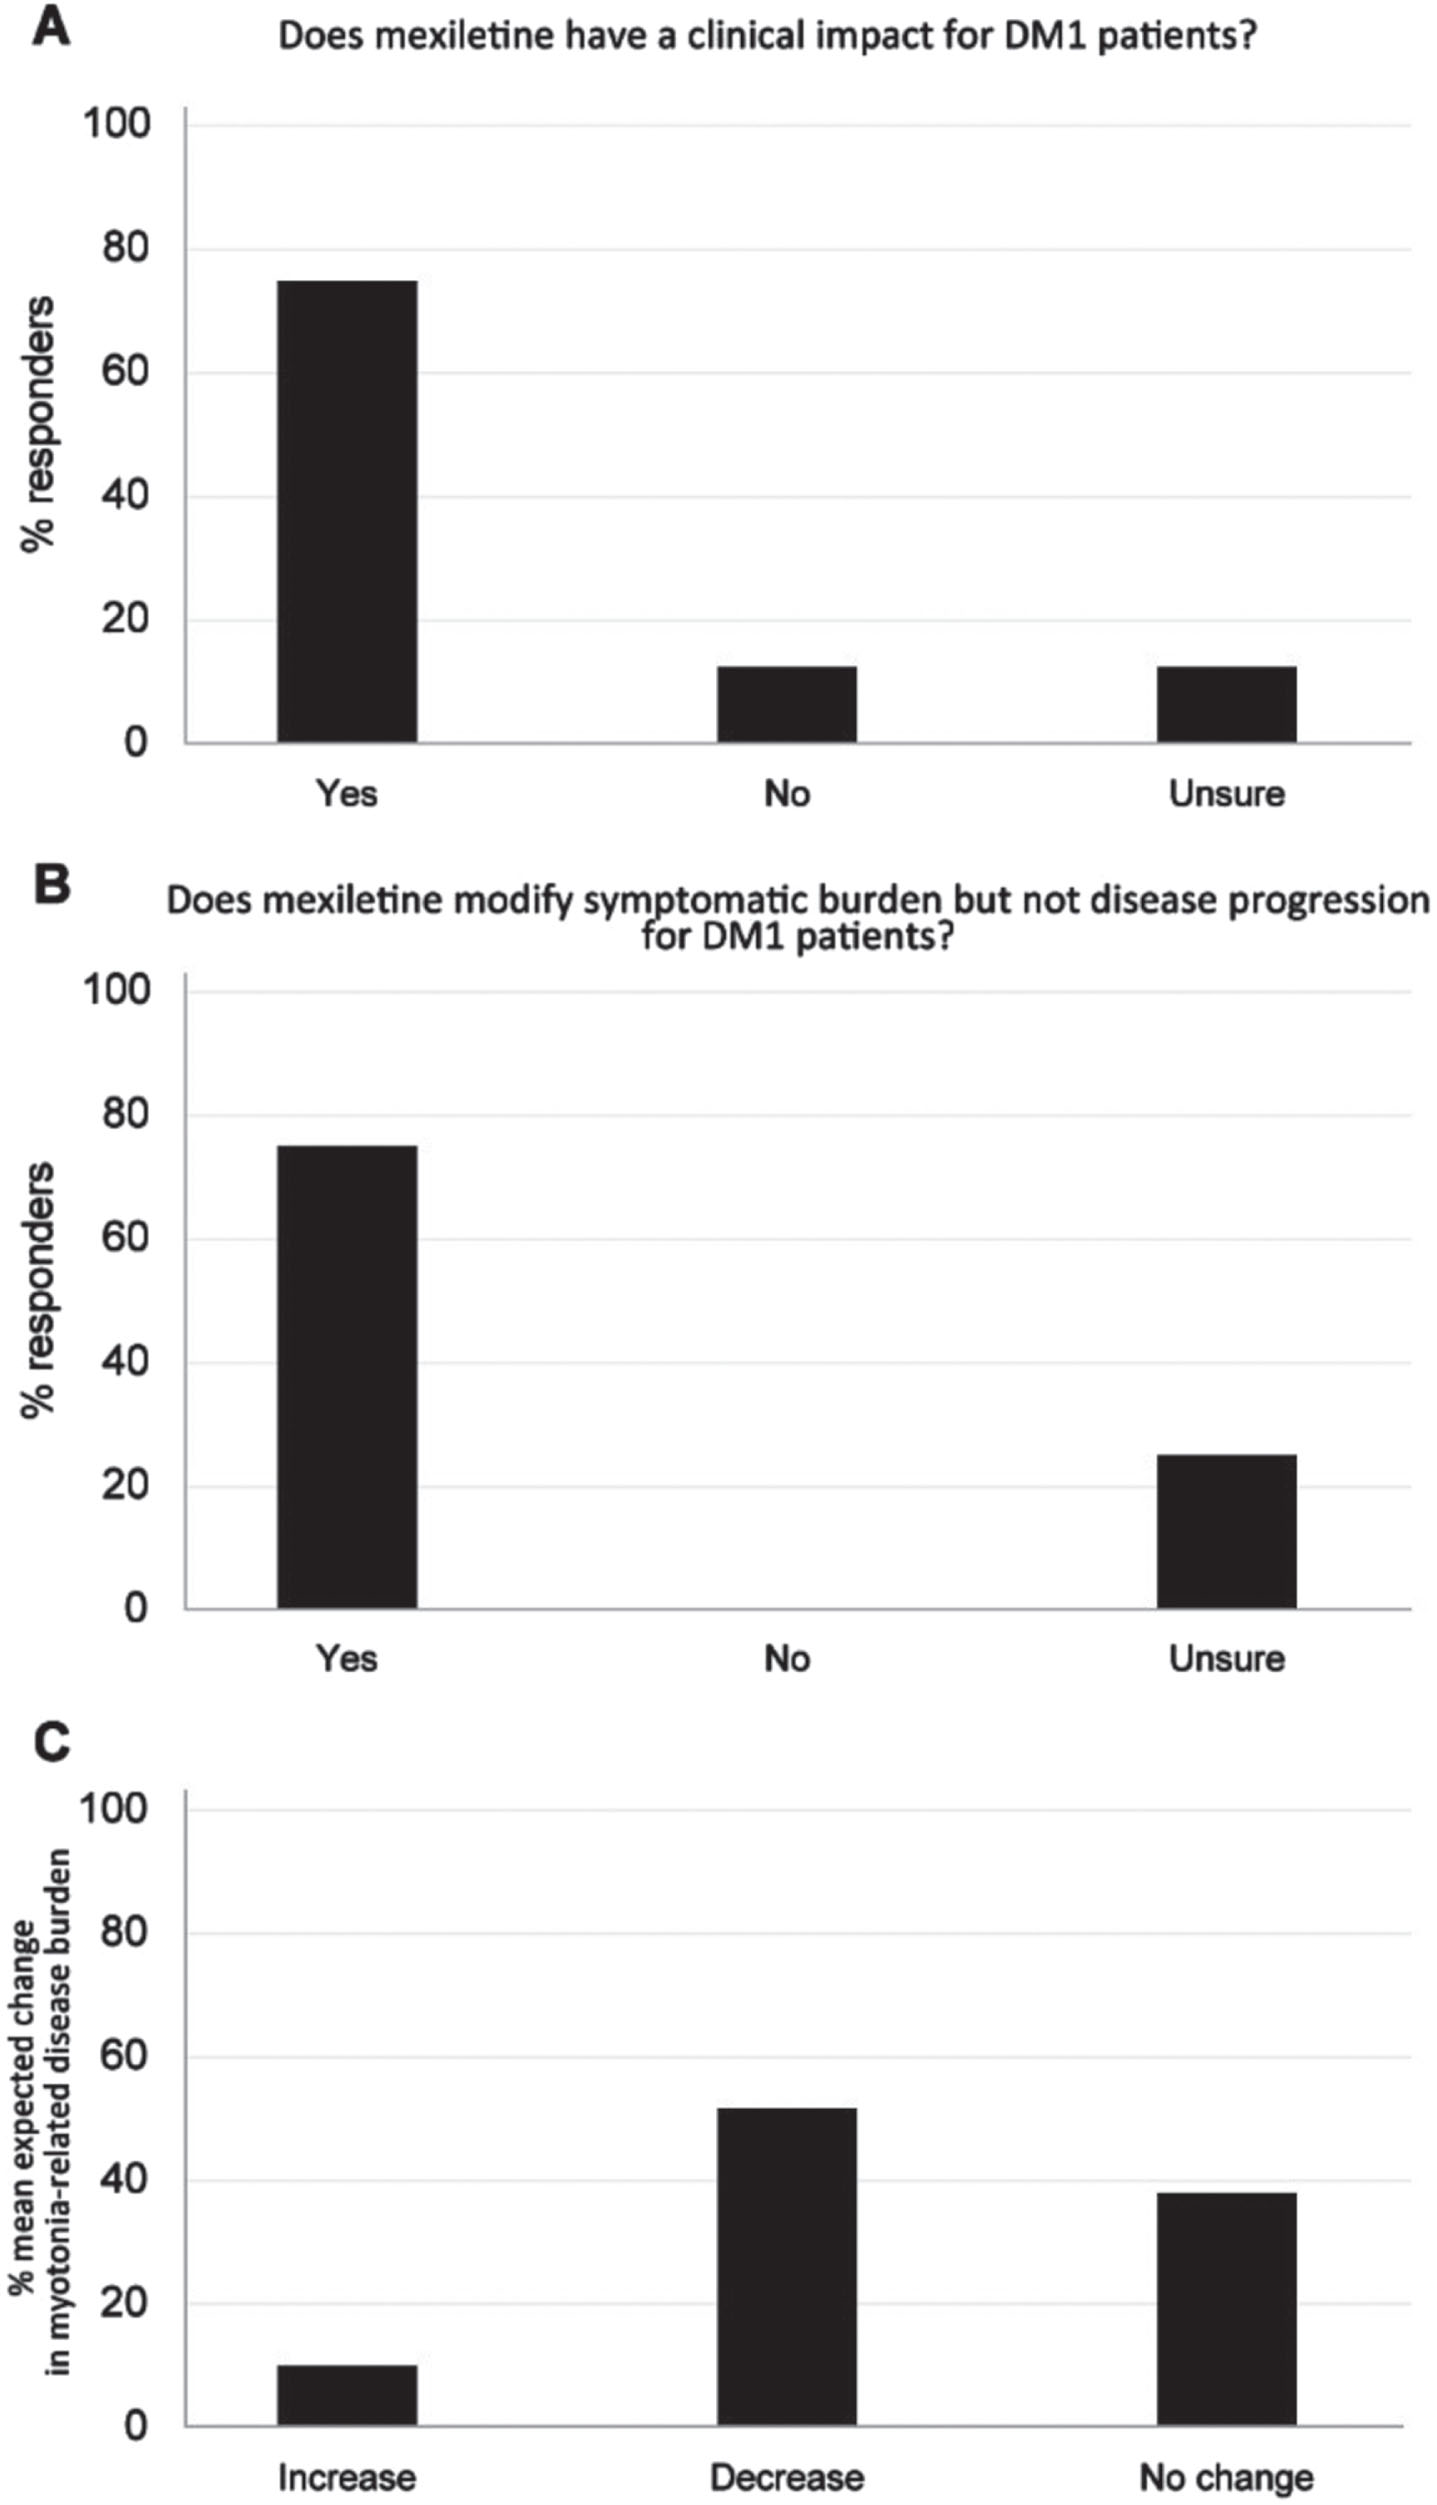 (A) Clinical impact of mexiletine treatment on handgrip myotonia of DM1 patients in the opinion of the expert panelists. (B) Benefit of mexiletine in the modification of the disease burden and disease progression in DM1 patients in the opinion of the expert panelists. (C) Percentage of DM1 patients expected to experience a change in myotonia-related disease burden upon use of mexiletine vs BSC. BSC: best supportive care.